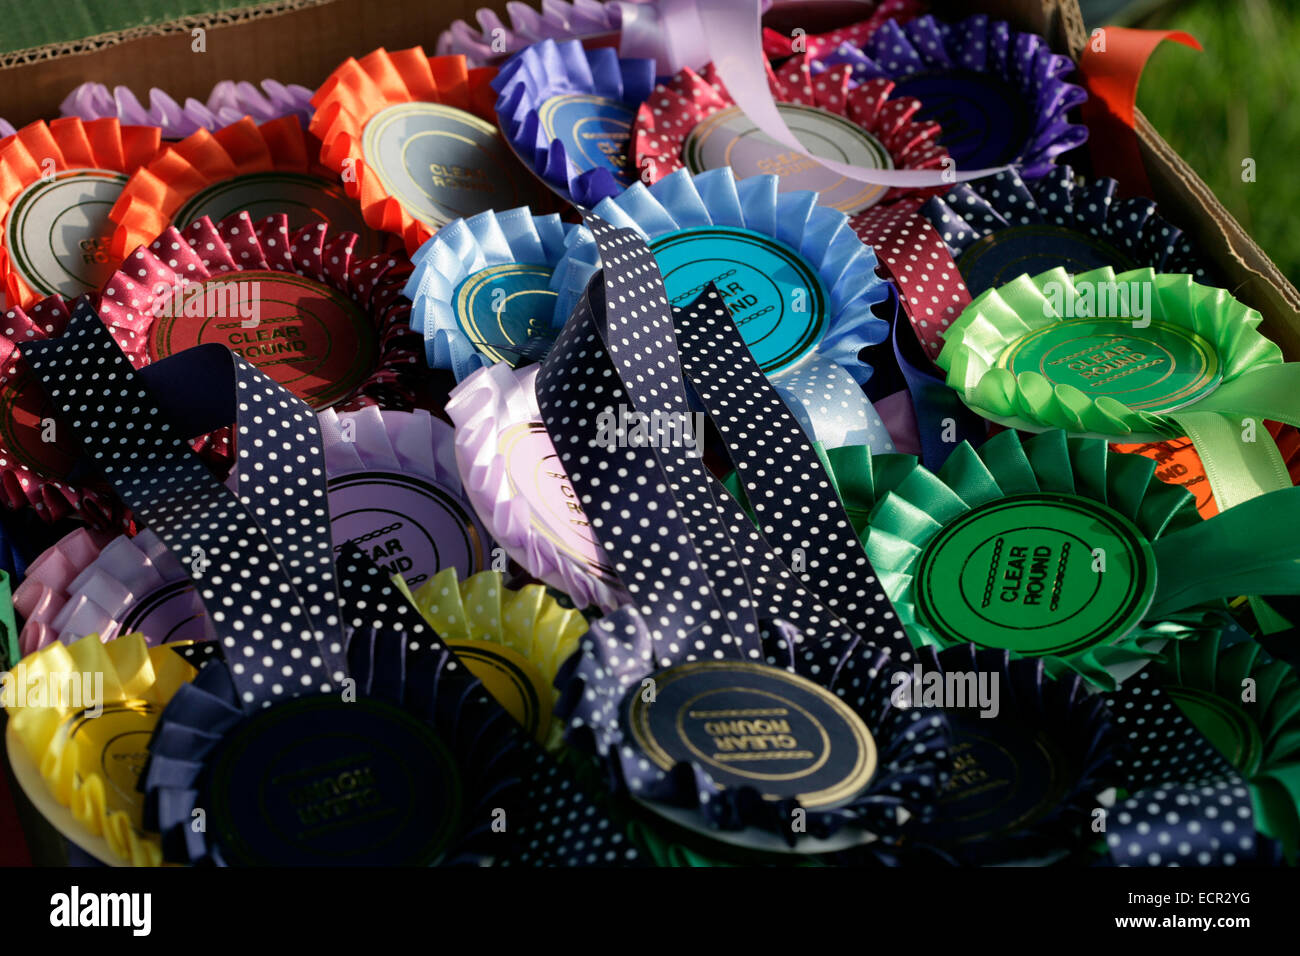 Rosettes ready to be presented at a pony/horse event in the UK Stock Photo